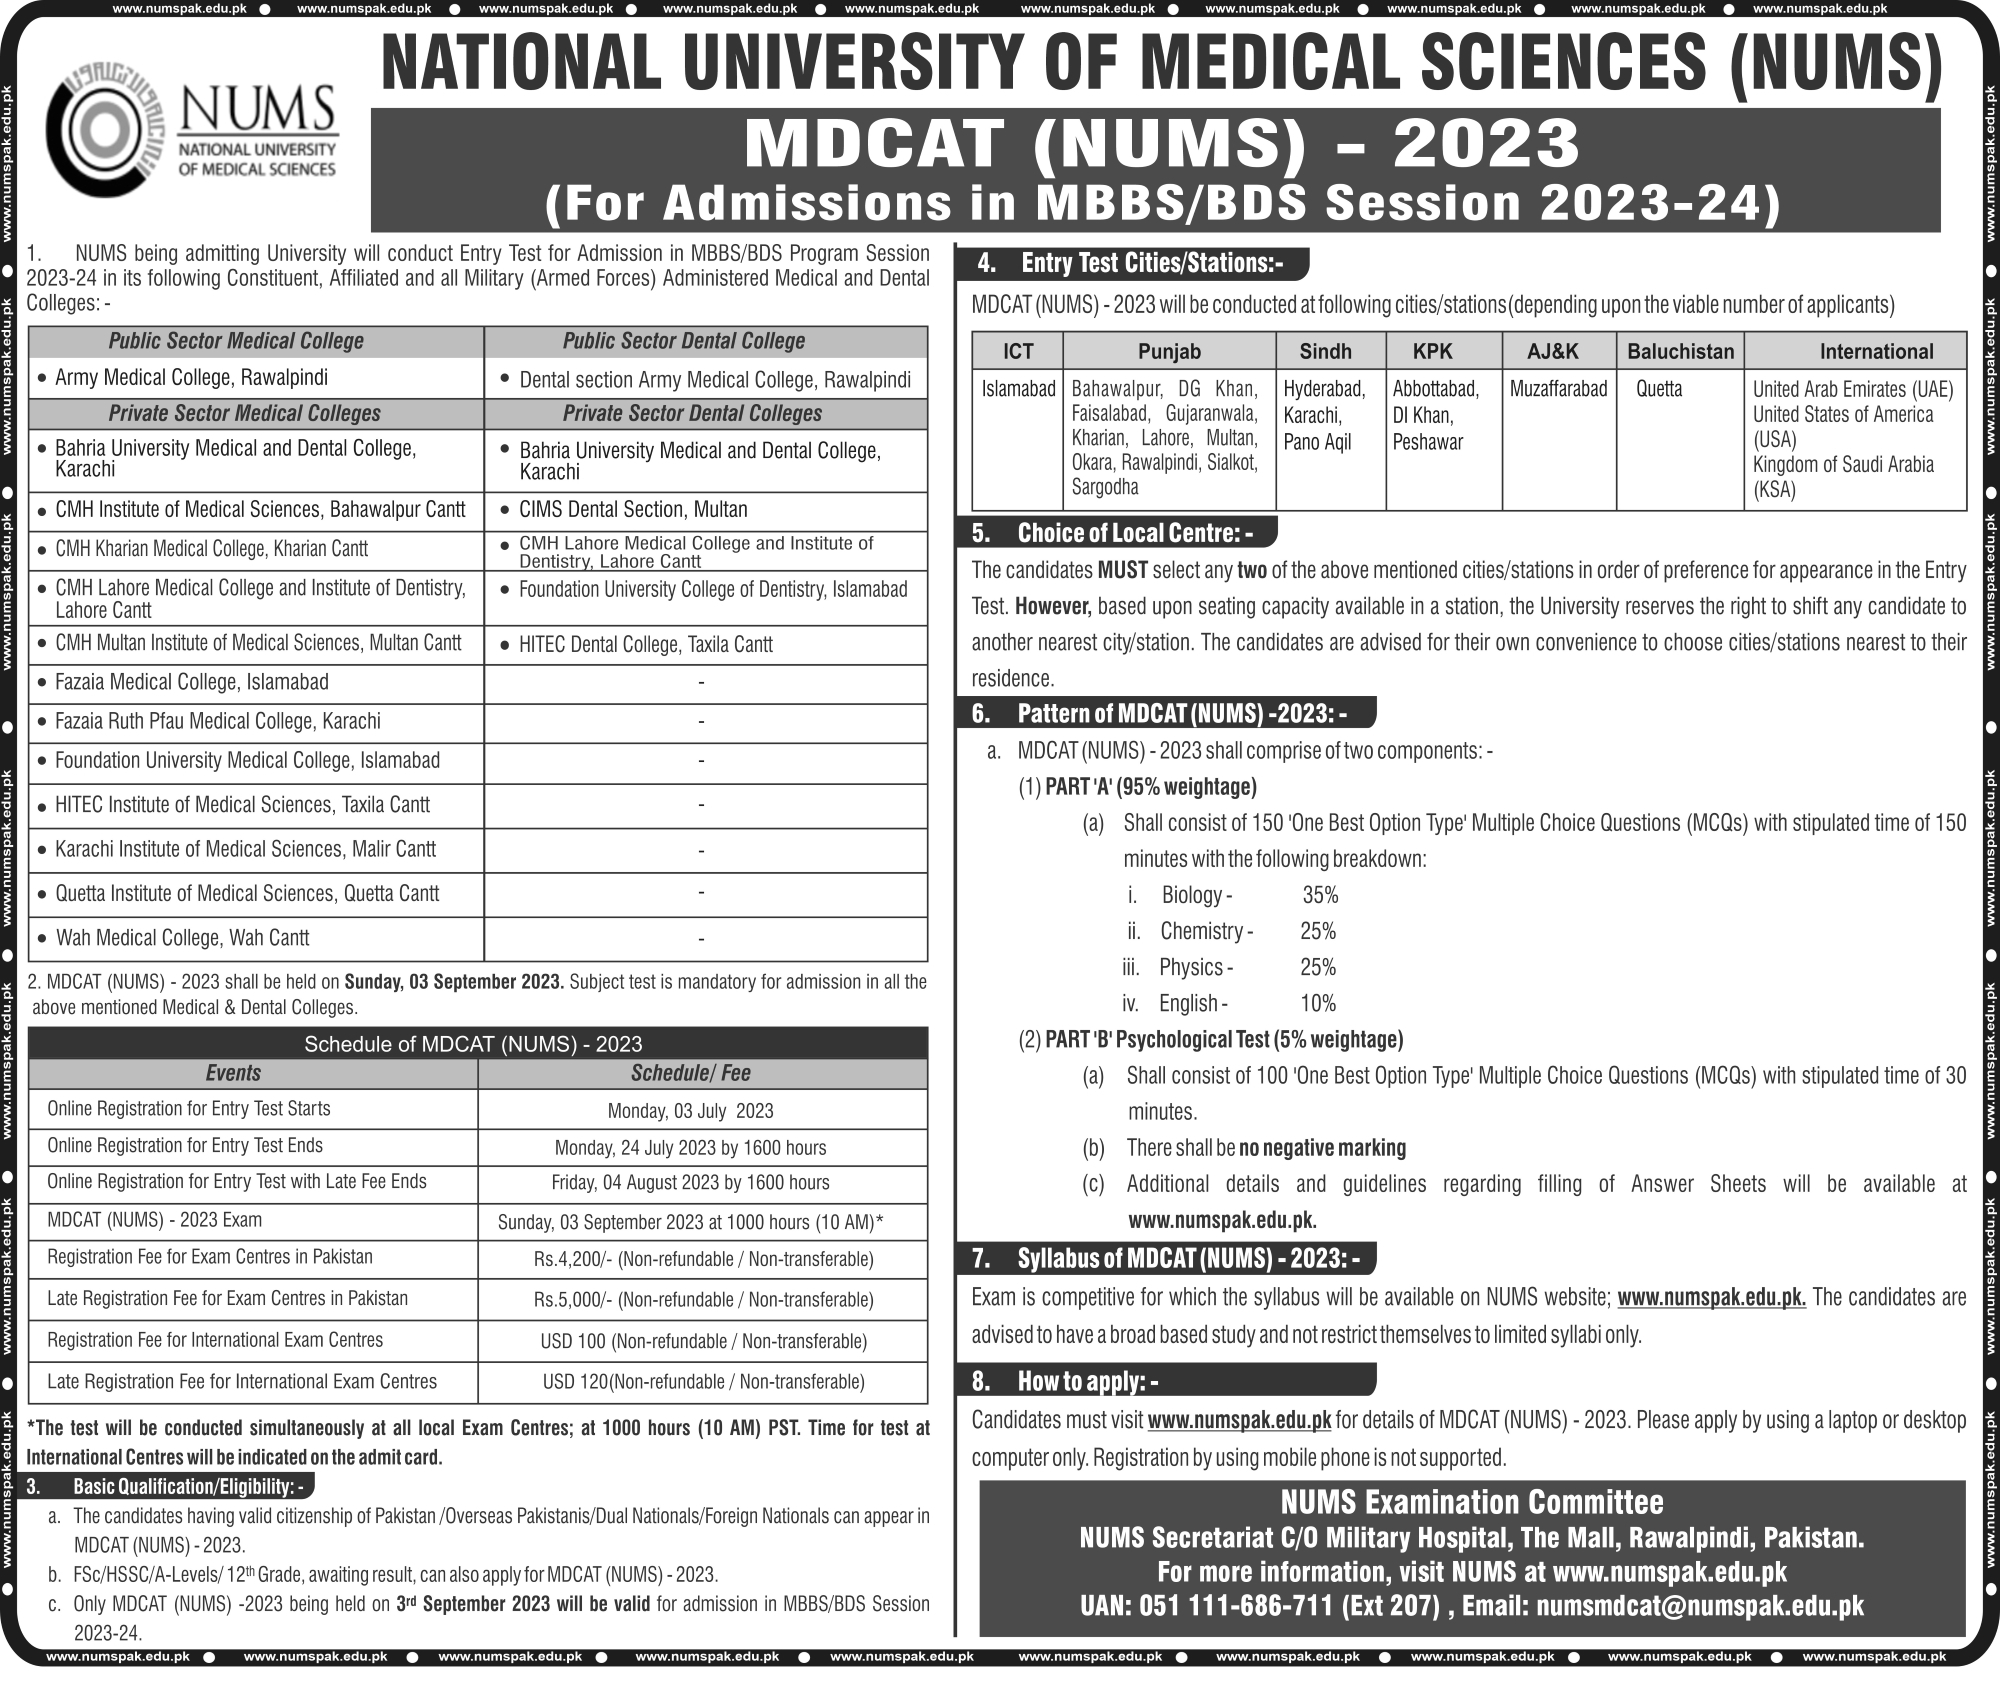 NUMS MDCAT Online Registration and Syllabus 2023